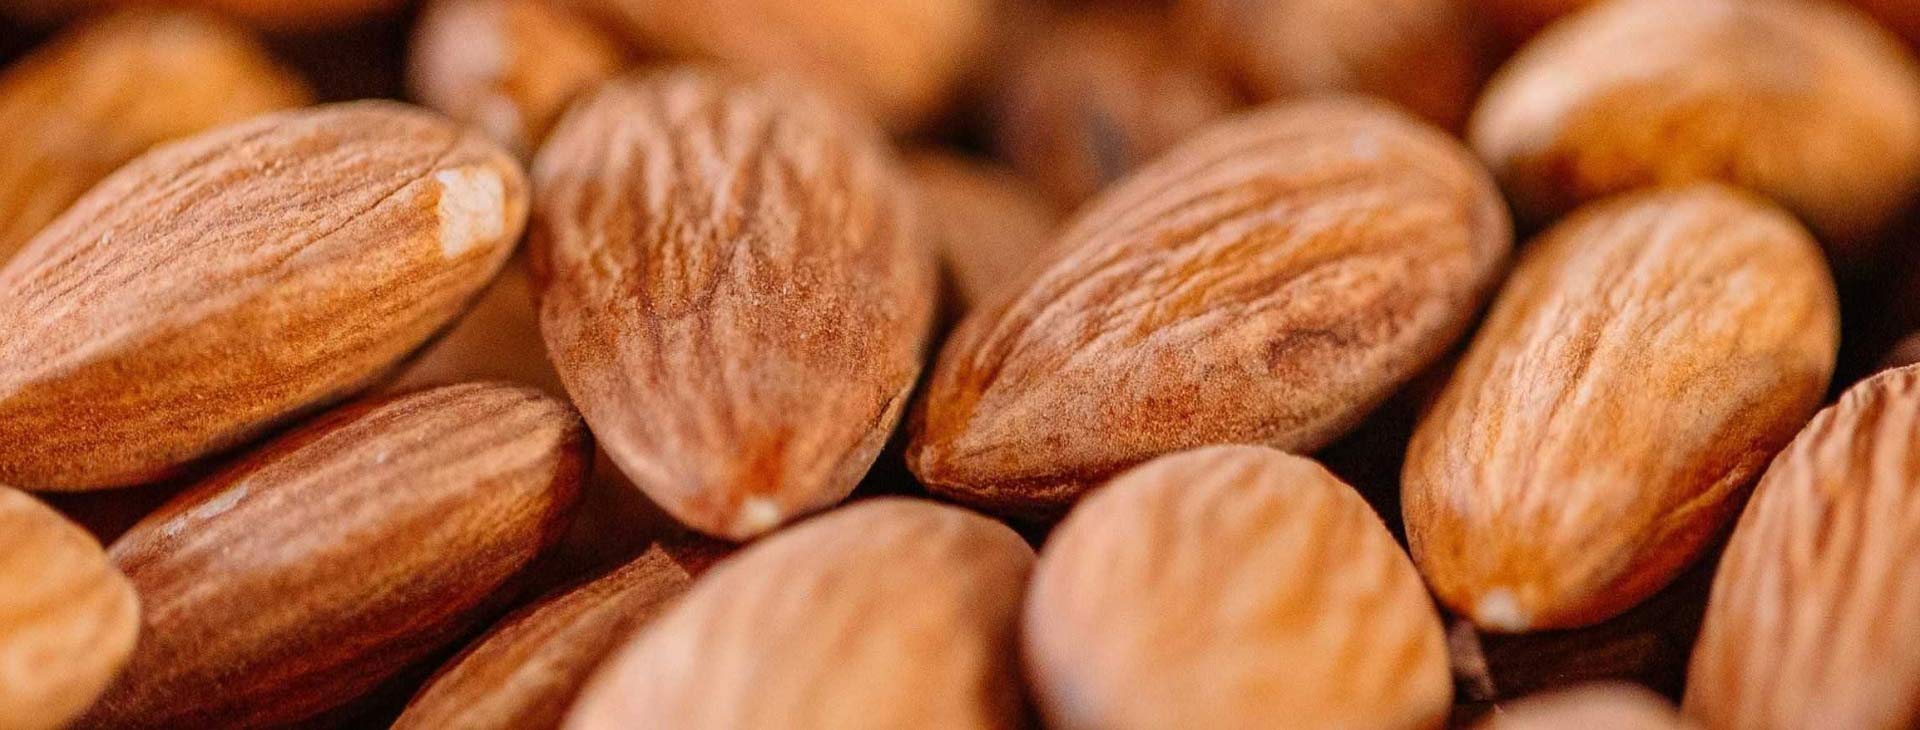 Whole Almonds - More Almond Products